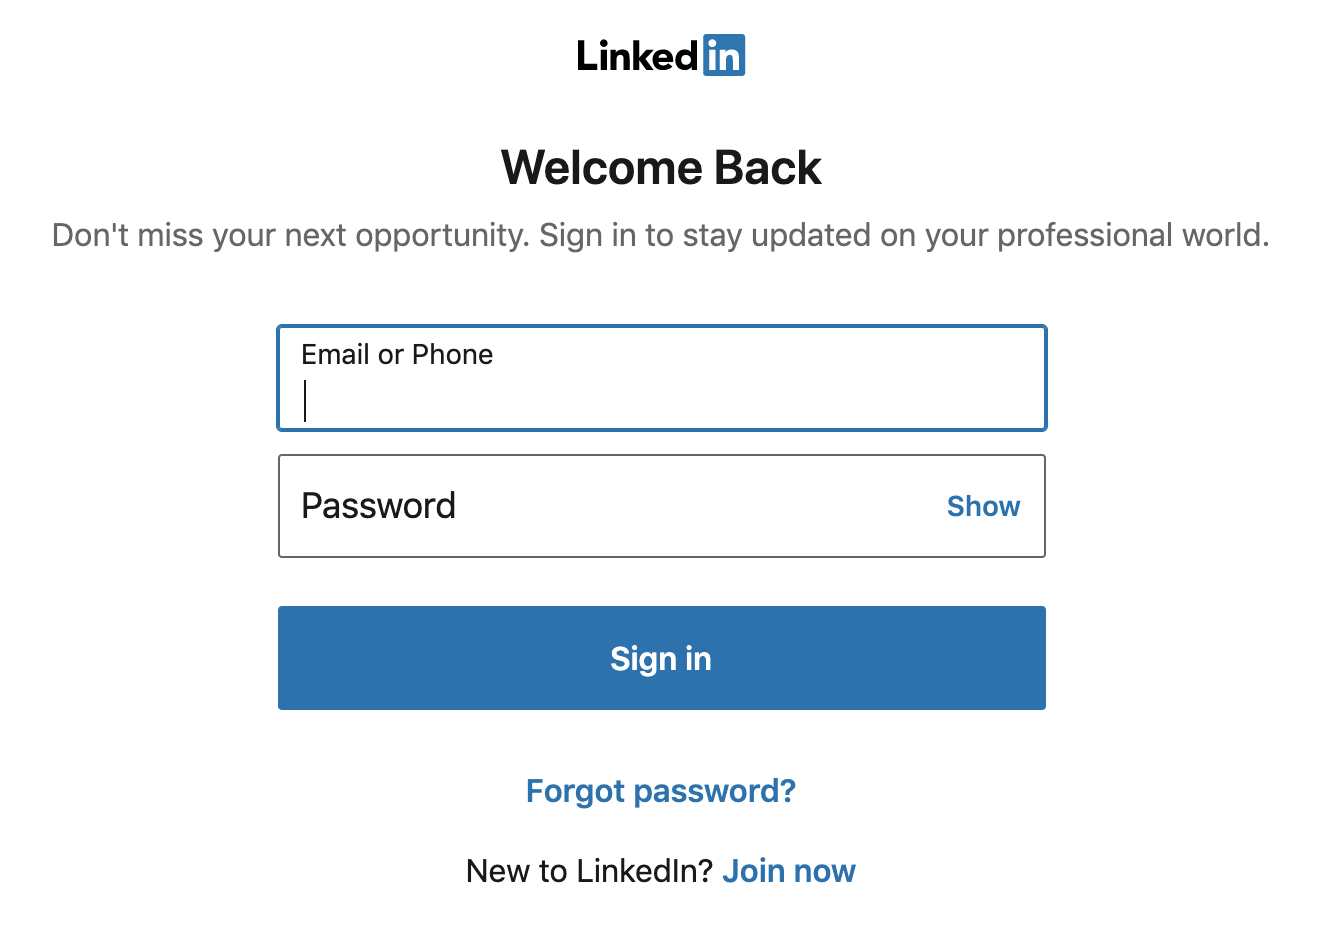 create linkedin campaign manager